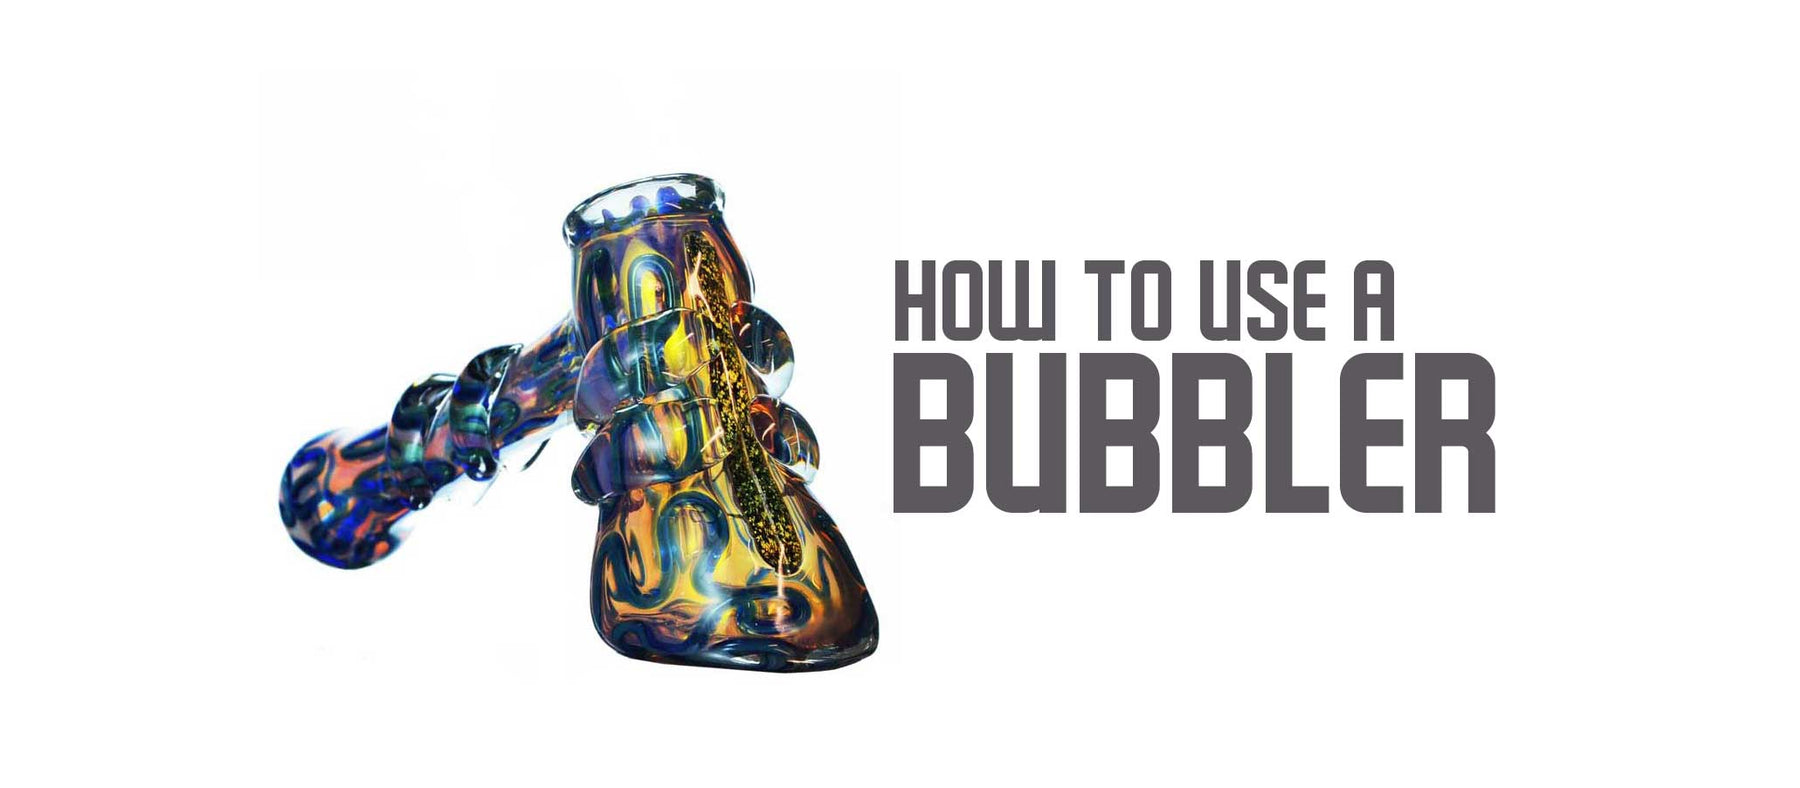 How To Use a Bubbler